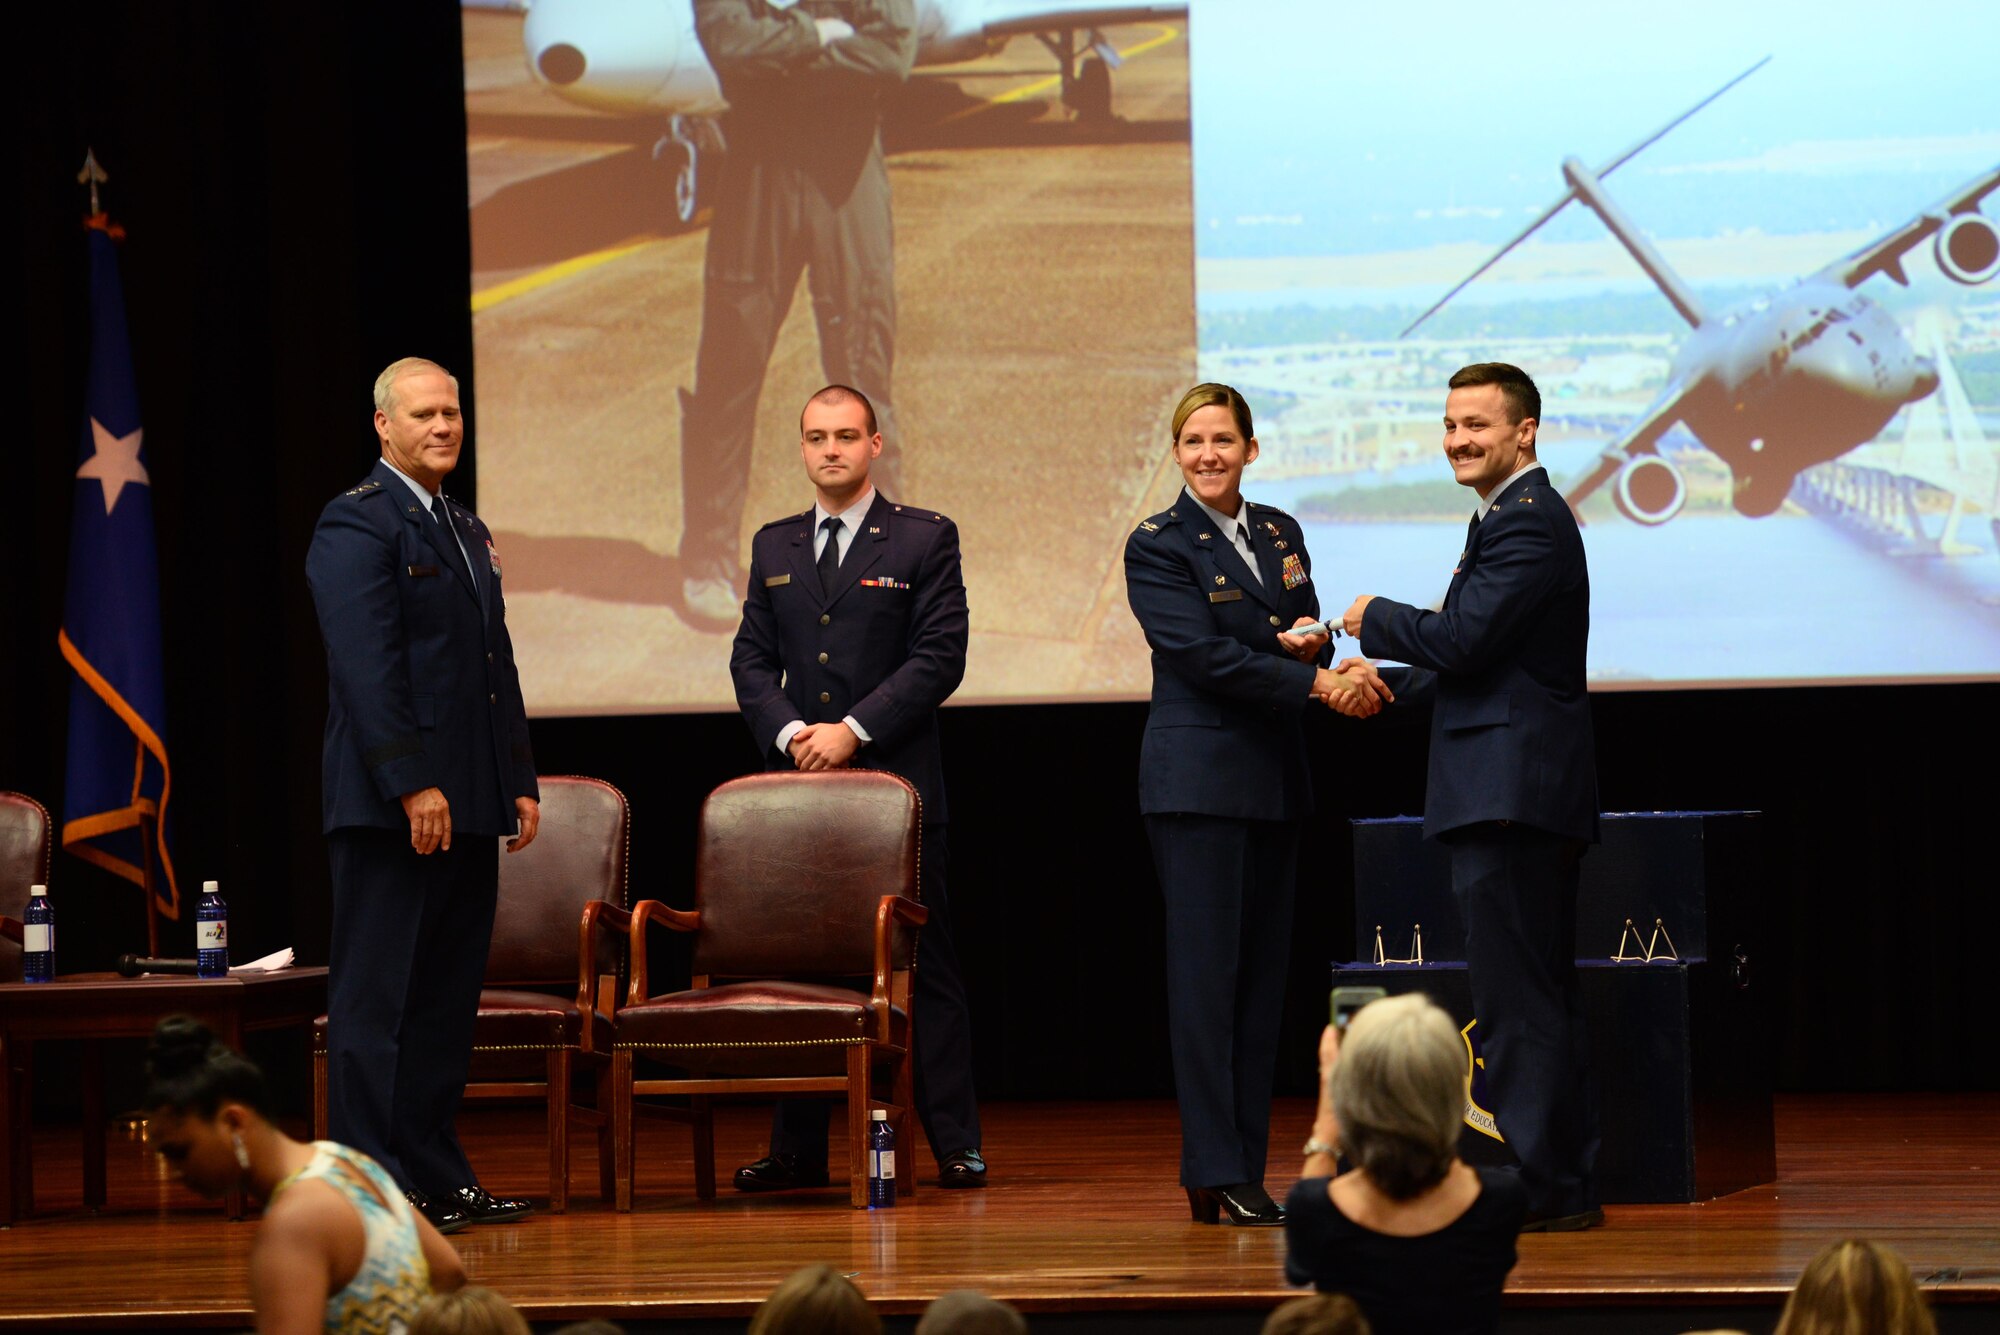 Col. Samantha Weeks, 14th Flying Training Wing commander, presents 2nd Lt. Julius Peek III his certificate of graduation, Sept. 13, 2019, on Columbus Air Force Base, Mississippi. After graduating pilot training at Columbus AFB, pilots will now go to their specified base to start training on their assigned aircraft. (U.S. Air Force photo by Airman 1st Class Jake Jacobsen)